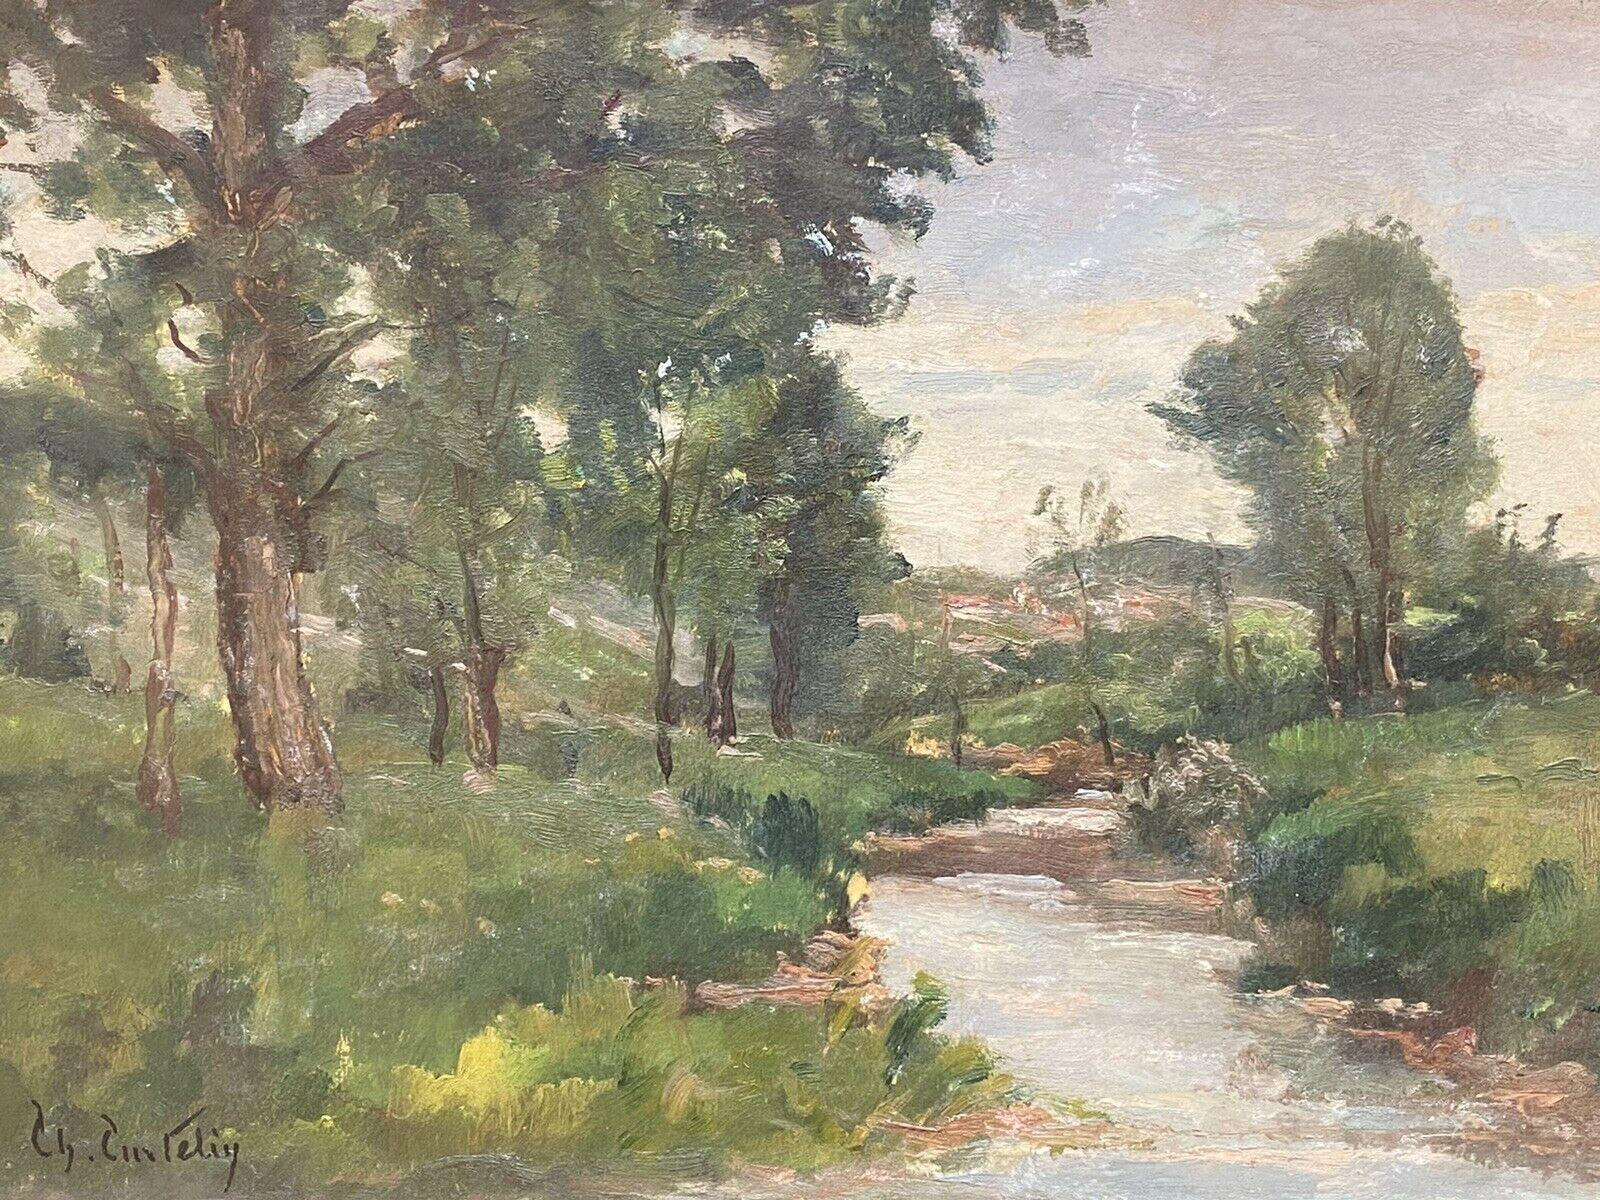 CURTELIN (FRENCH 1859-1912) EN PLEIN AIR IMPRESSIONIST OIL - RIVER LANDSCAPE - Painting by CHARLES CURTELIN (FRENCH 1859-1912